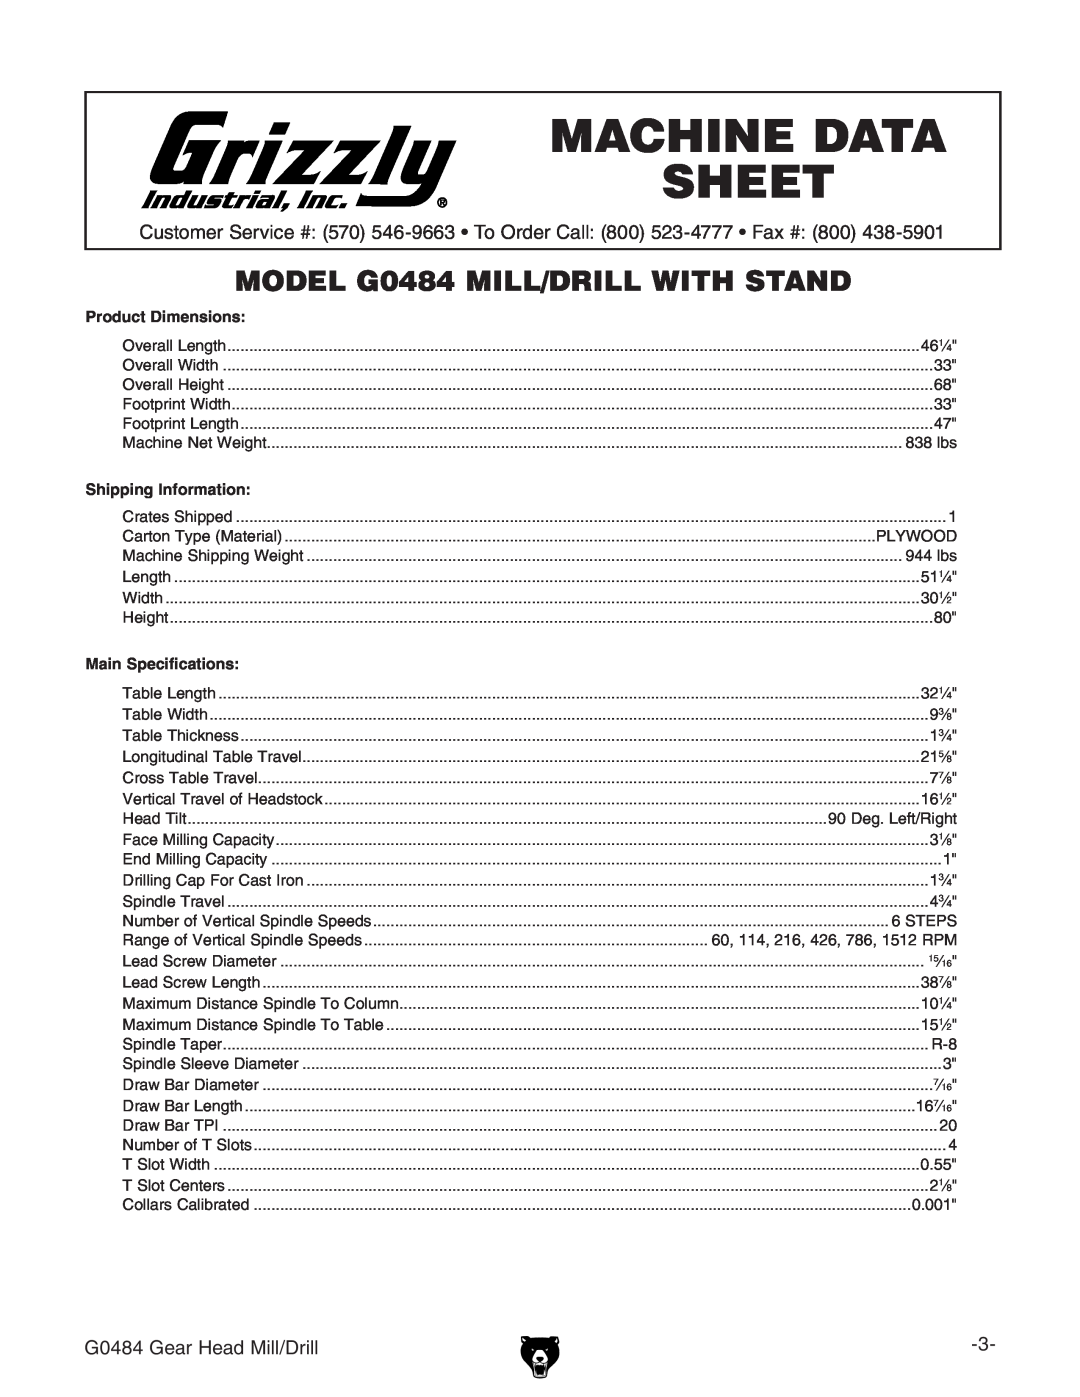 Grizzly owner manual Machine Data Sheet, MoDEl G0484 MIll/DrIll wITH STAND, Product Dimensions, Shipping Information 